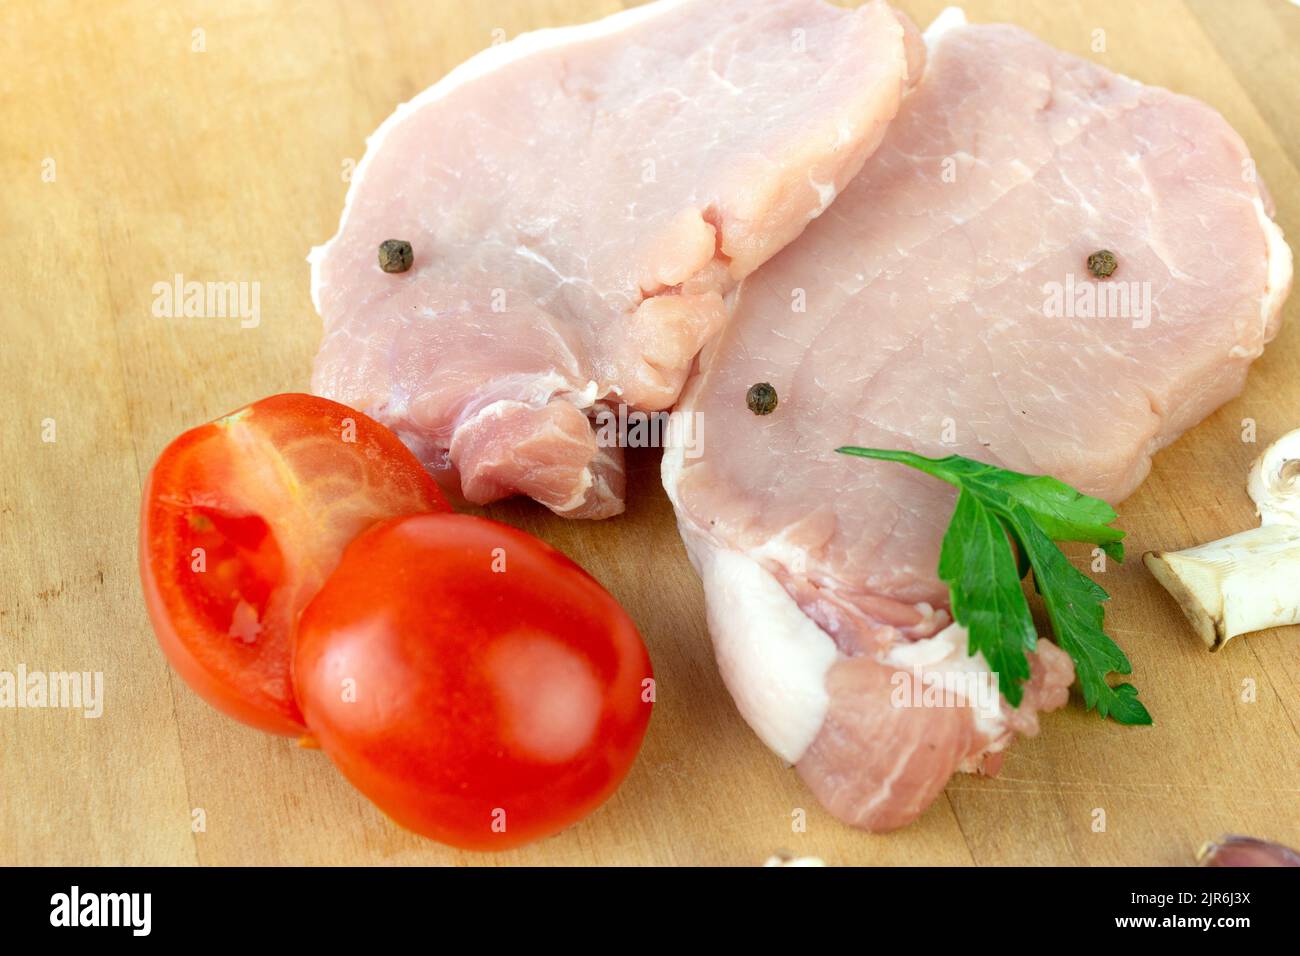 Raw meat. Raw fillet of stuck with garlic, tomato, spice, pepper, champignon close up Stock Photo